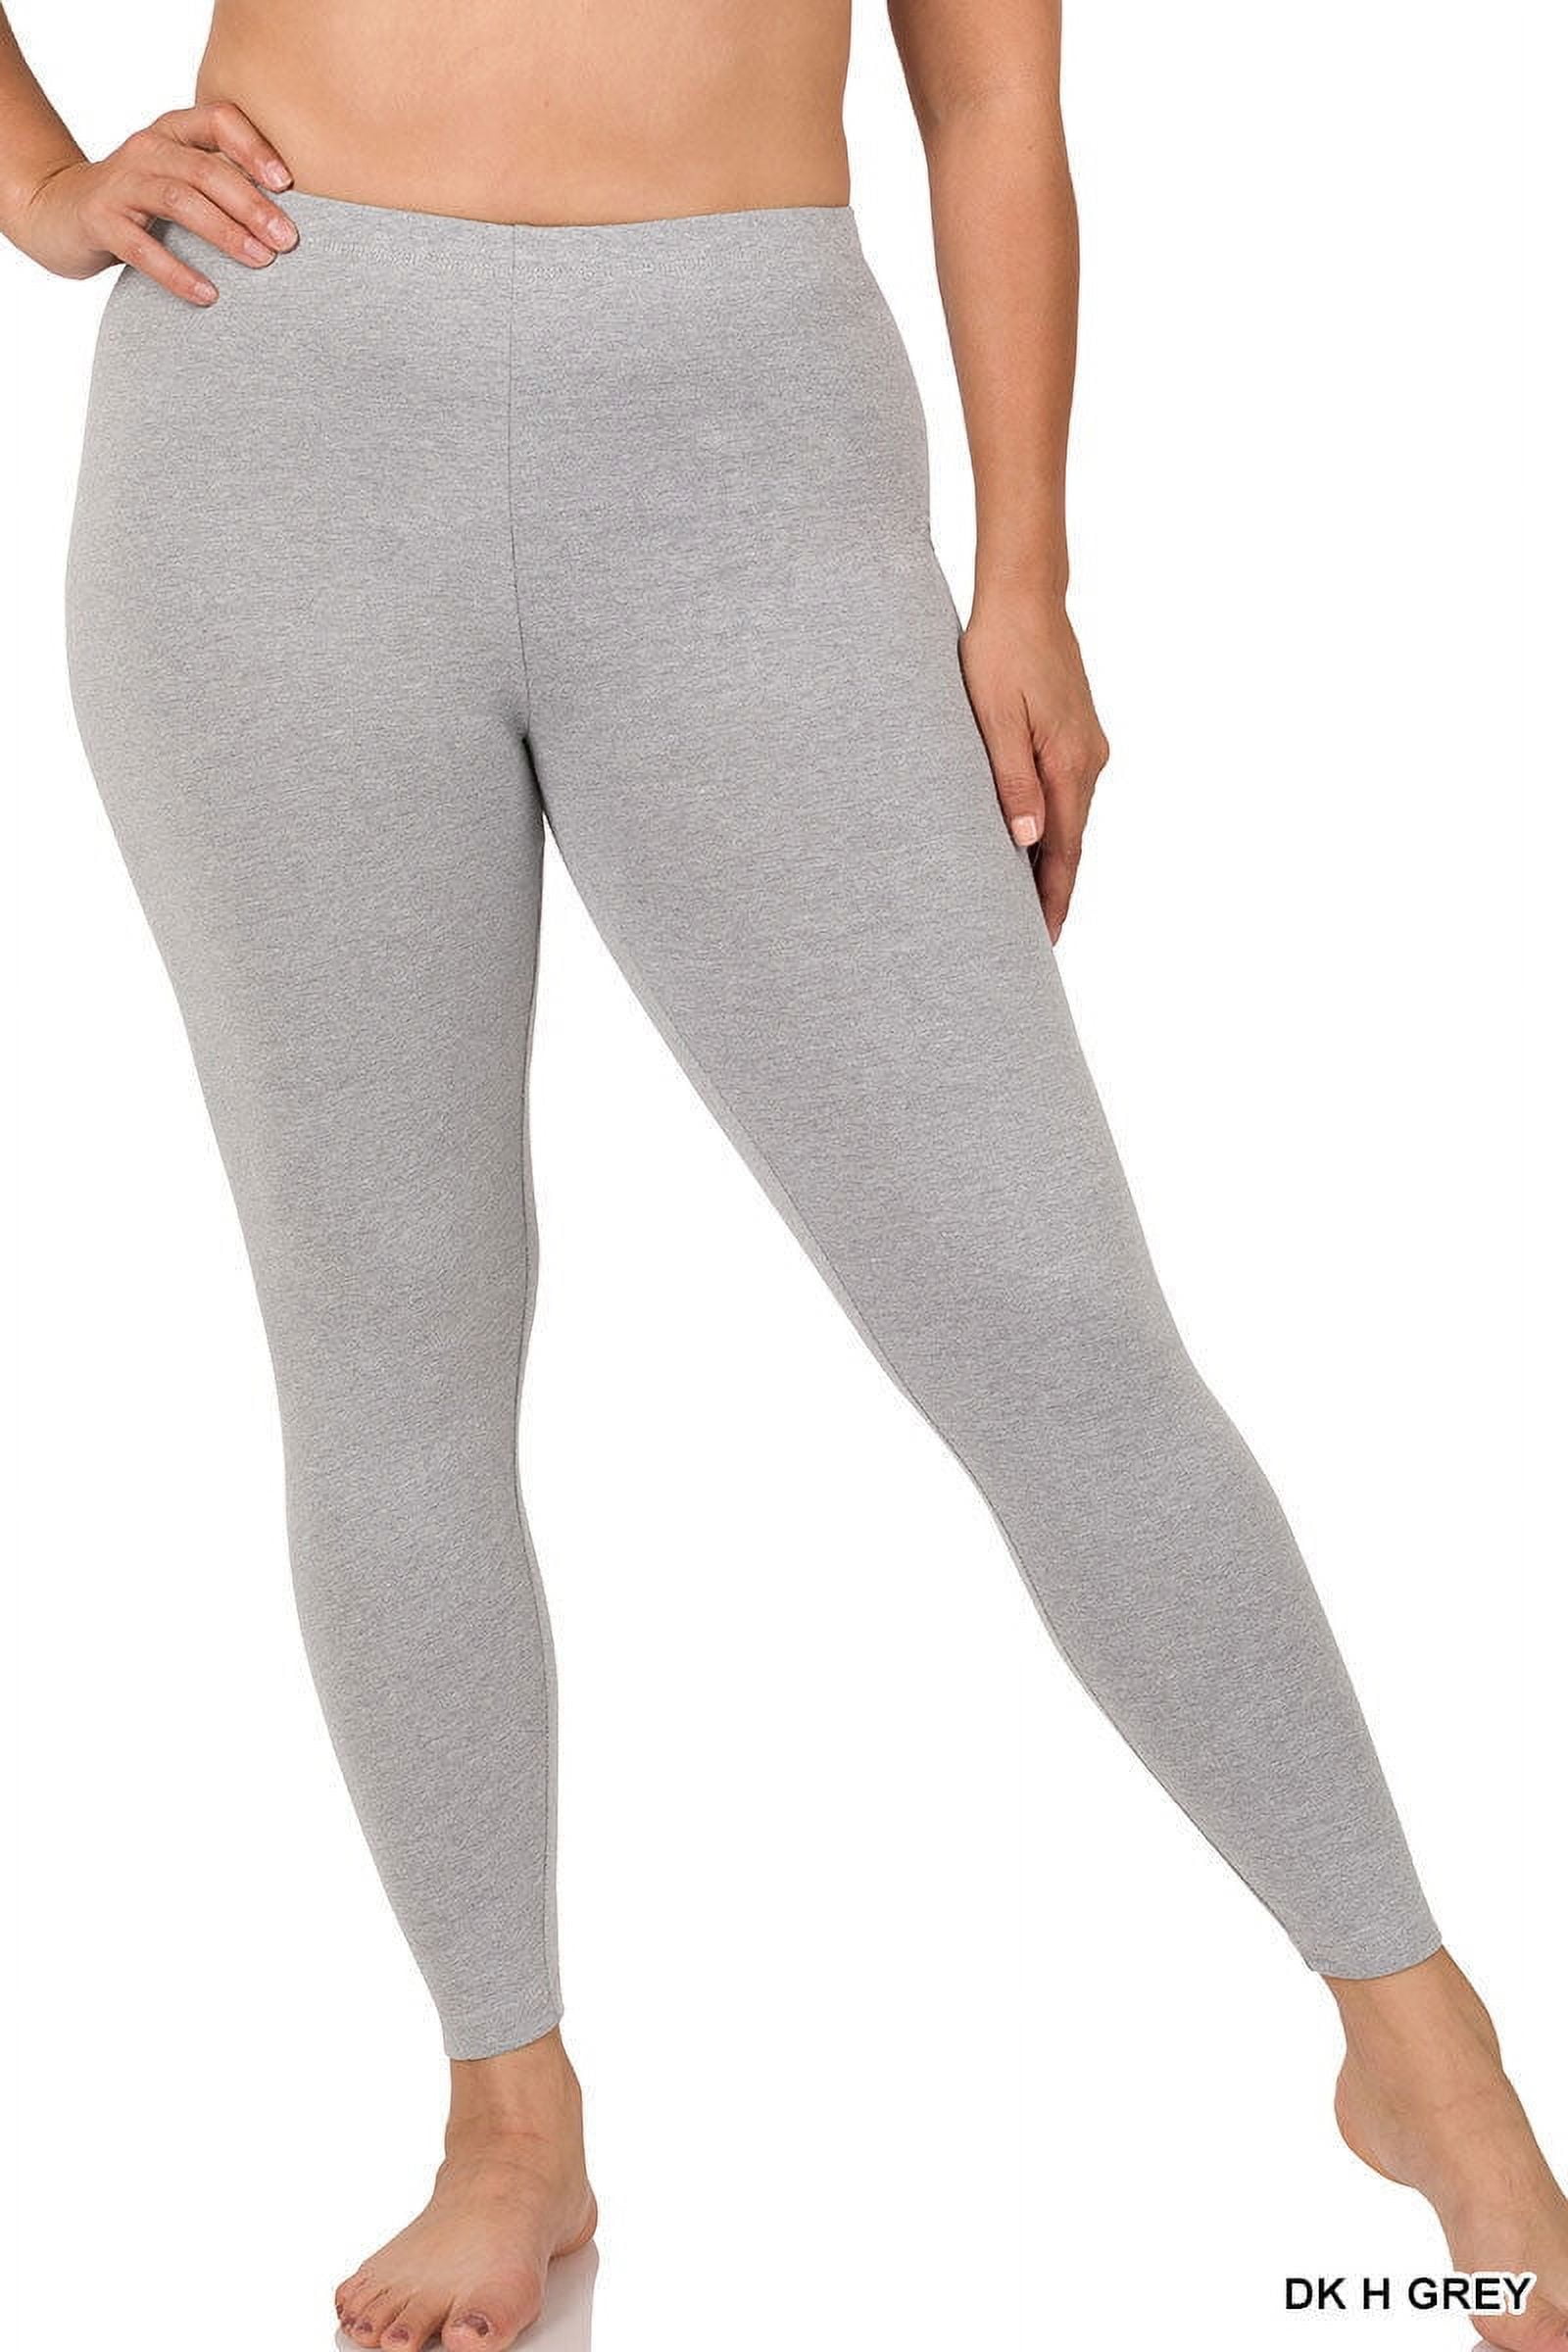 Womens Full Length Cotton Leggings All Sizes and Colors - High Quality